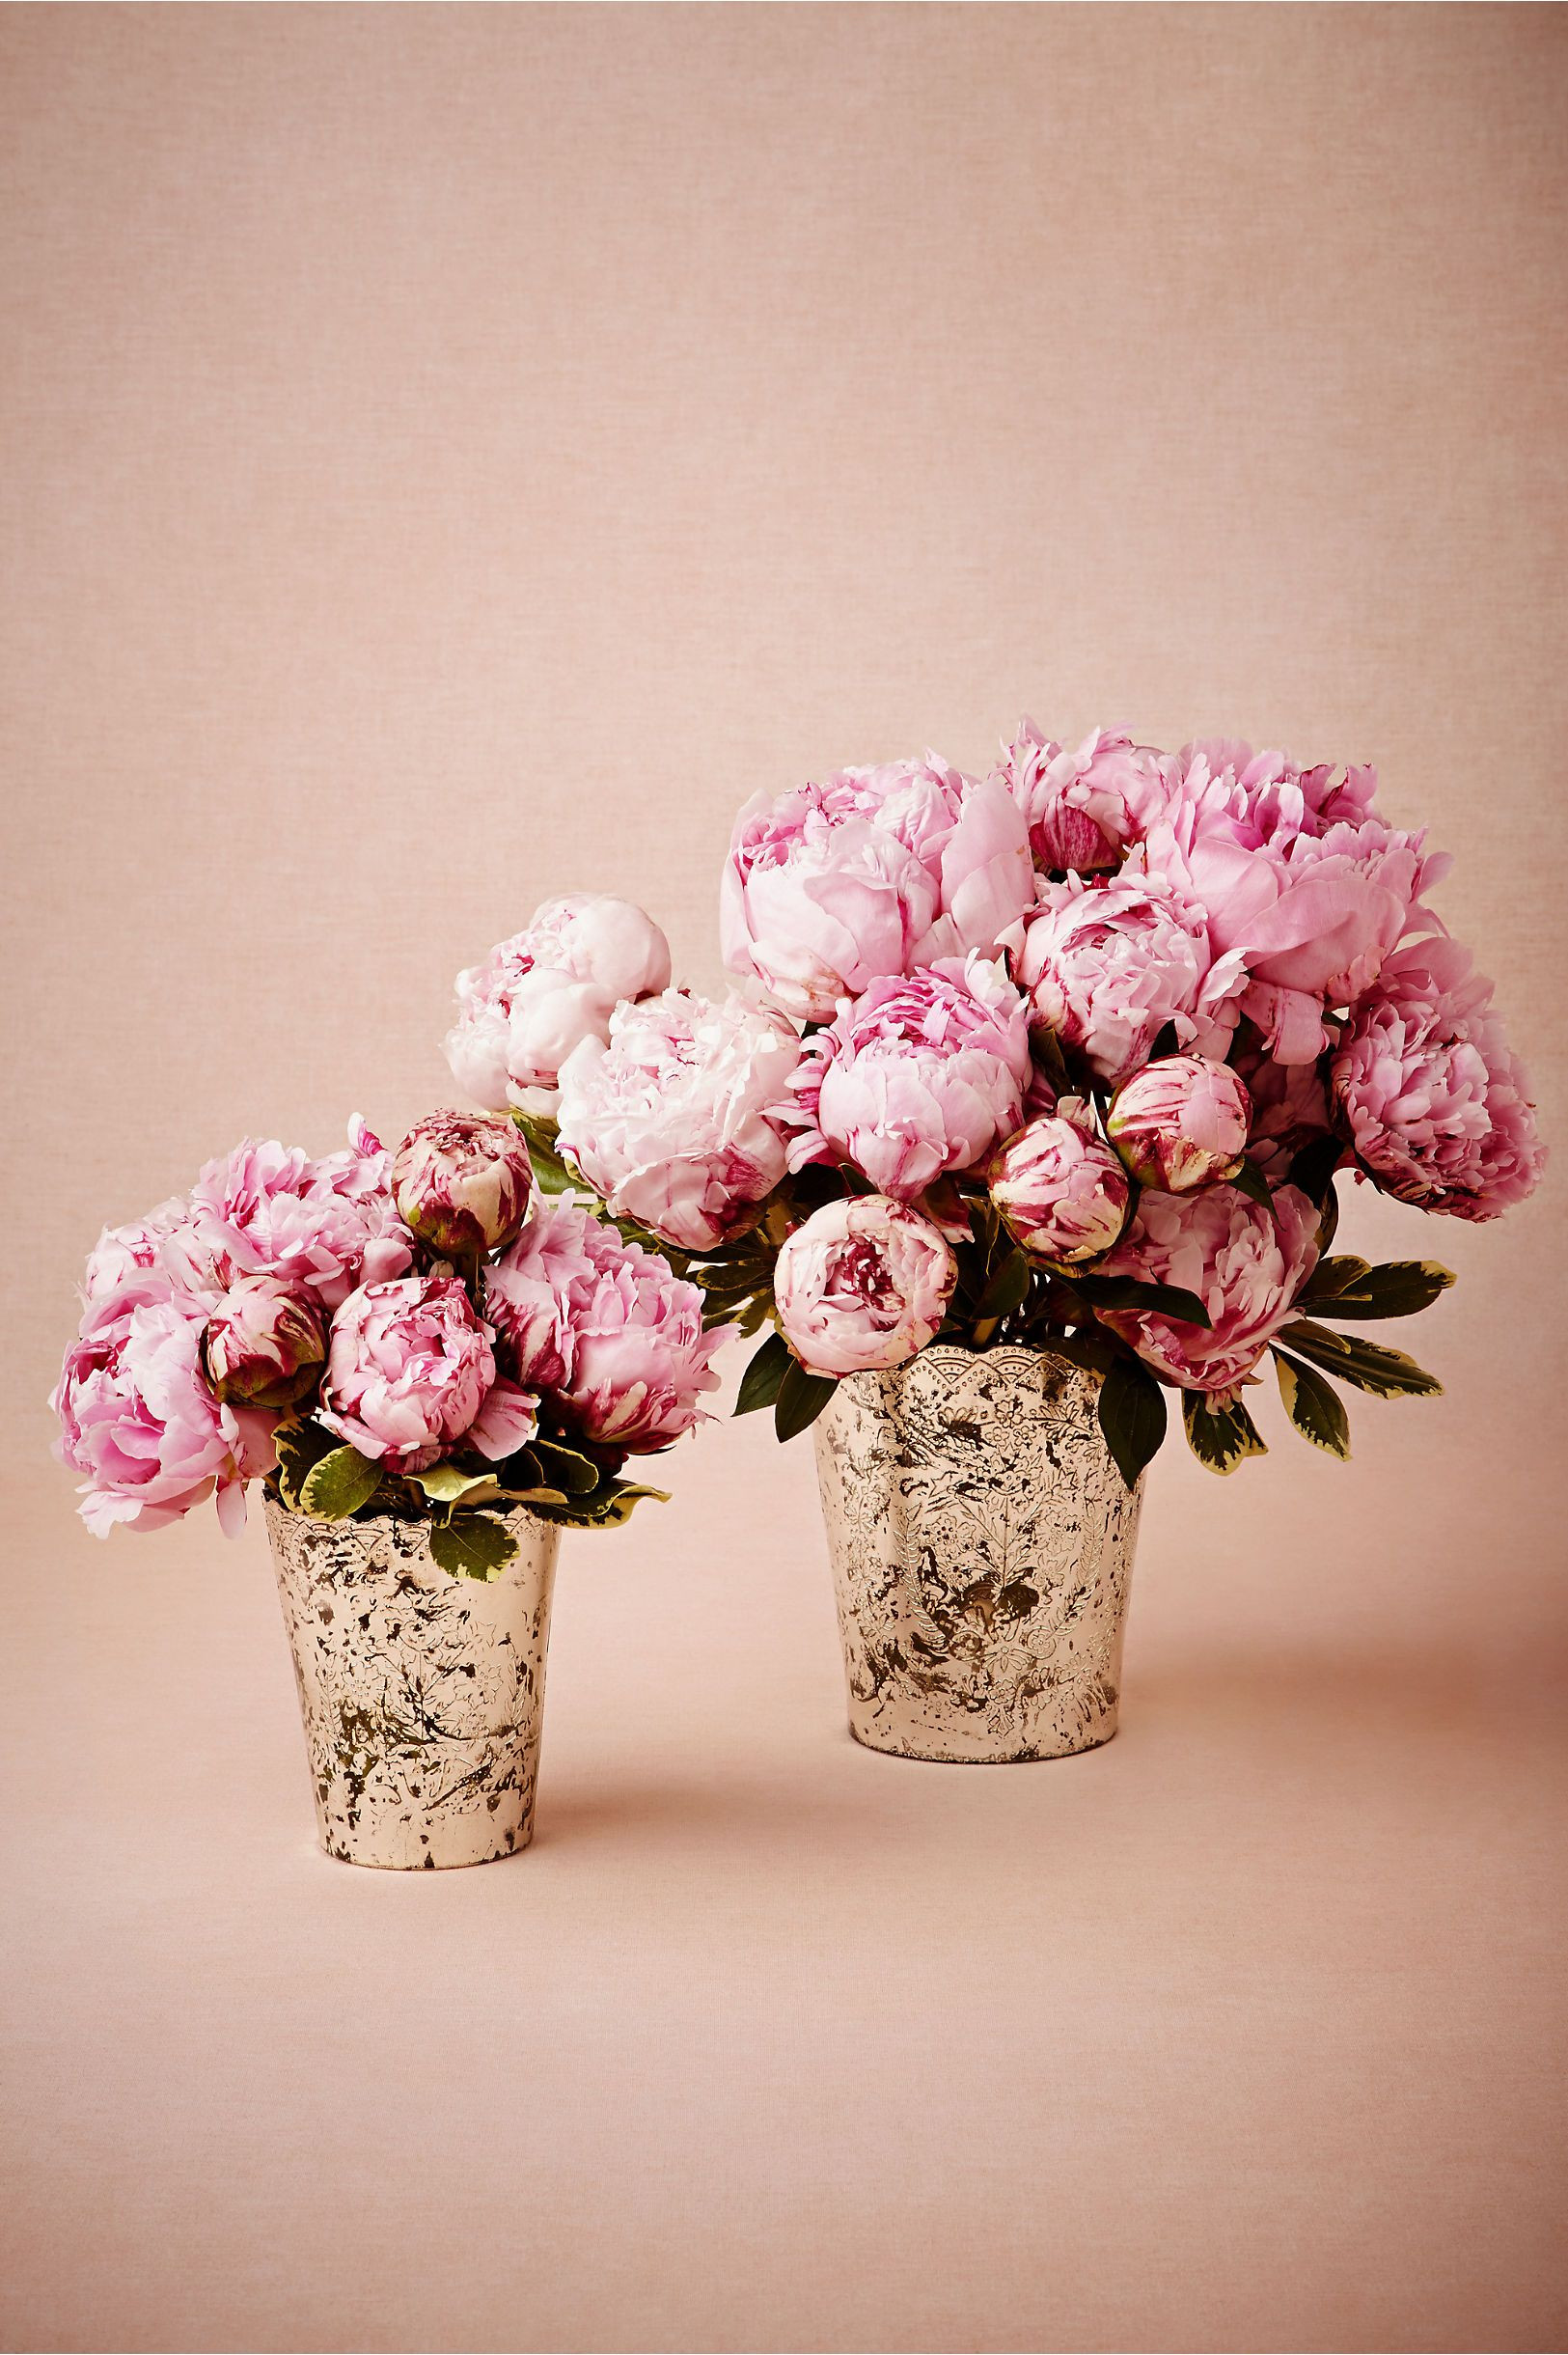 23 Spectacular Best Vase for Peonies 2024 free download best vase for peonies of tracing botany vase in dacor centerpieces at bhldn wedding intended for bright a pink peonies in mercury vases tracing botany vase from bhldn